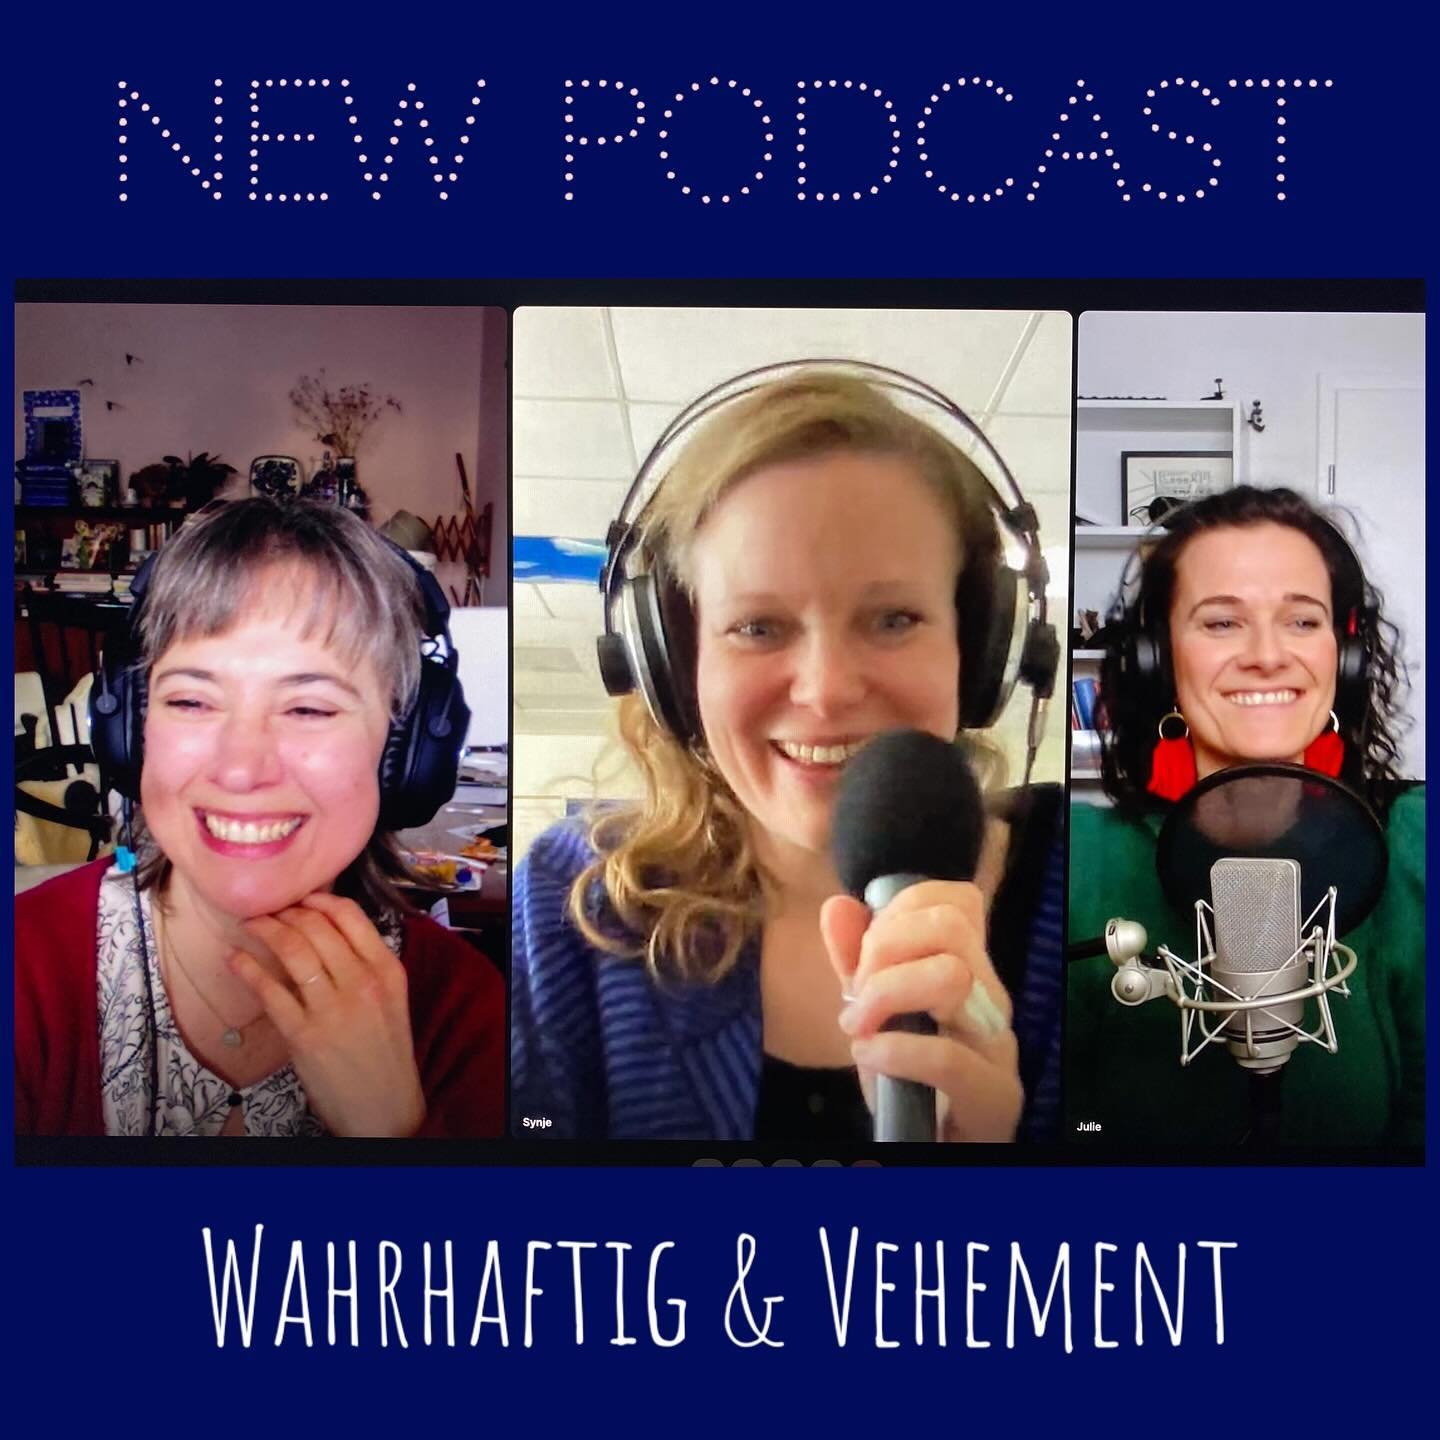 I recently had the most wonderful and uplifting conversation with Julie and Synje for their podcast Wahrhaftig &amp; Vehement @wahrhaftig_und_vehement 

It felt like an inspiring conversation among friends with lots of laughs and the feeling of mutua